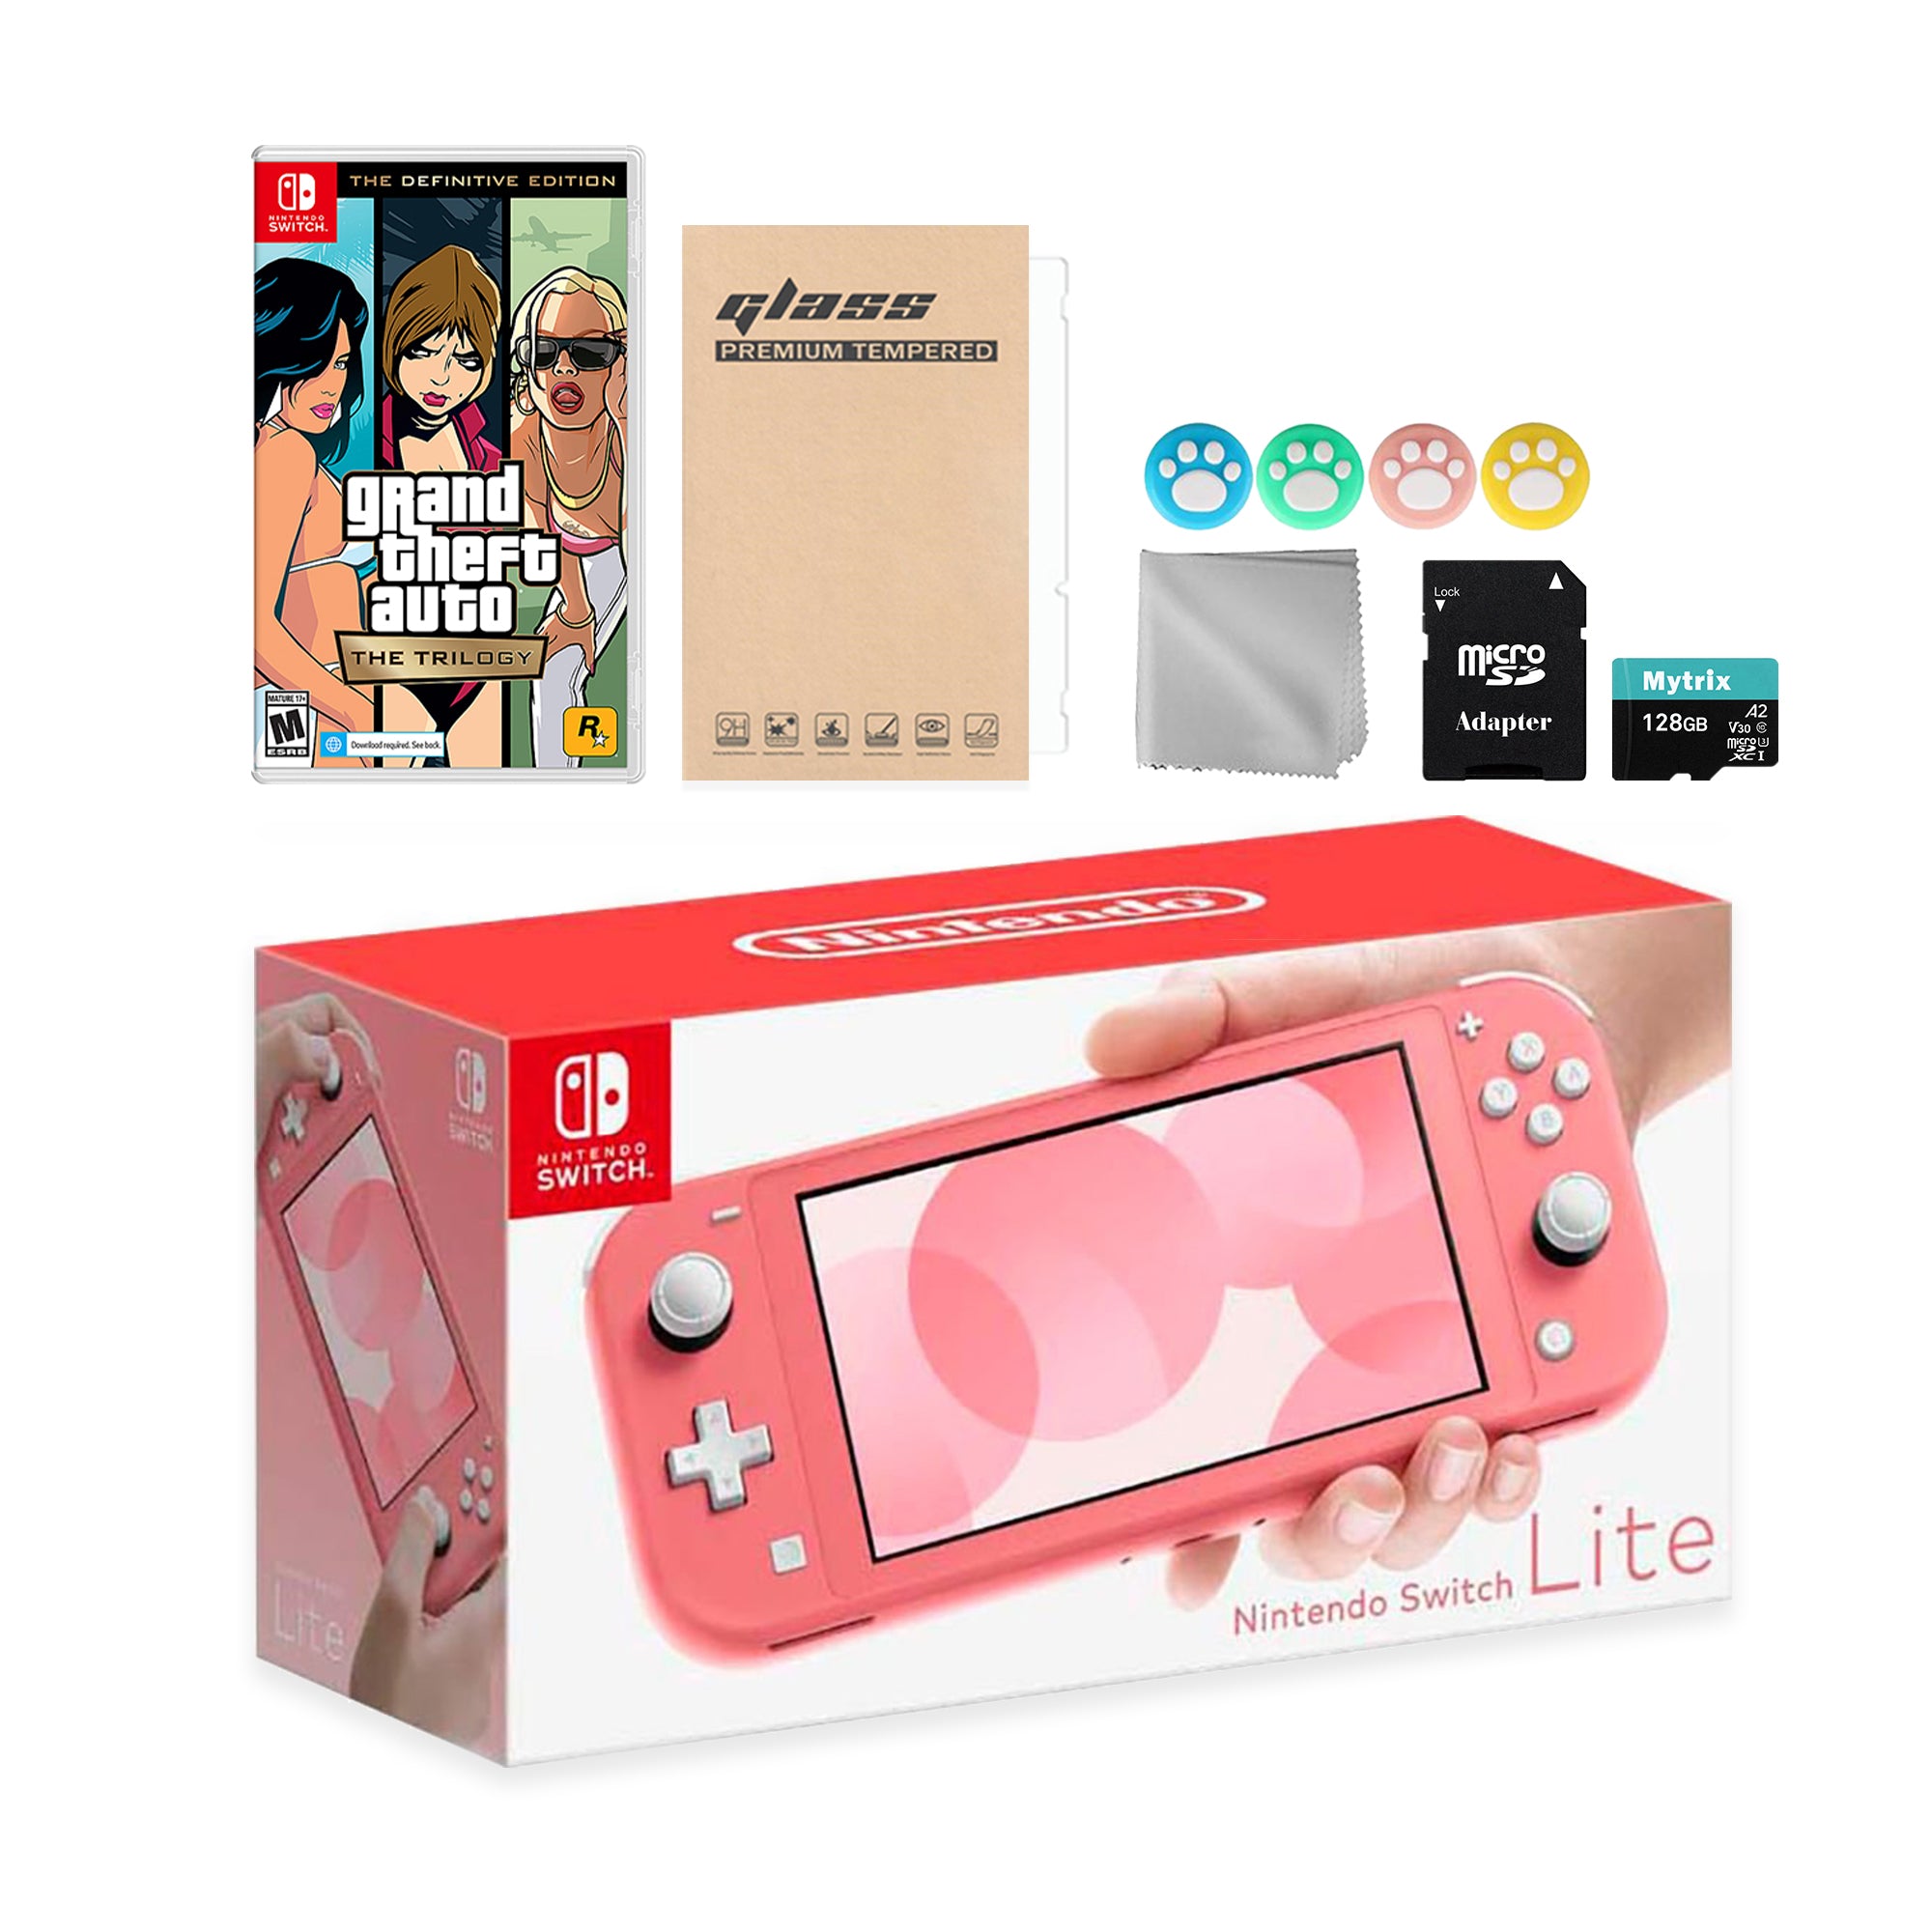 Nintendo Switch Mario Kart 8 Deluxe Bundle: Red Blue Console, Mario Kart 8 & Membership with Grand Theft Auto: The Trilogy with Mytrix 128GB Micro-SD Card and Accessories